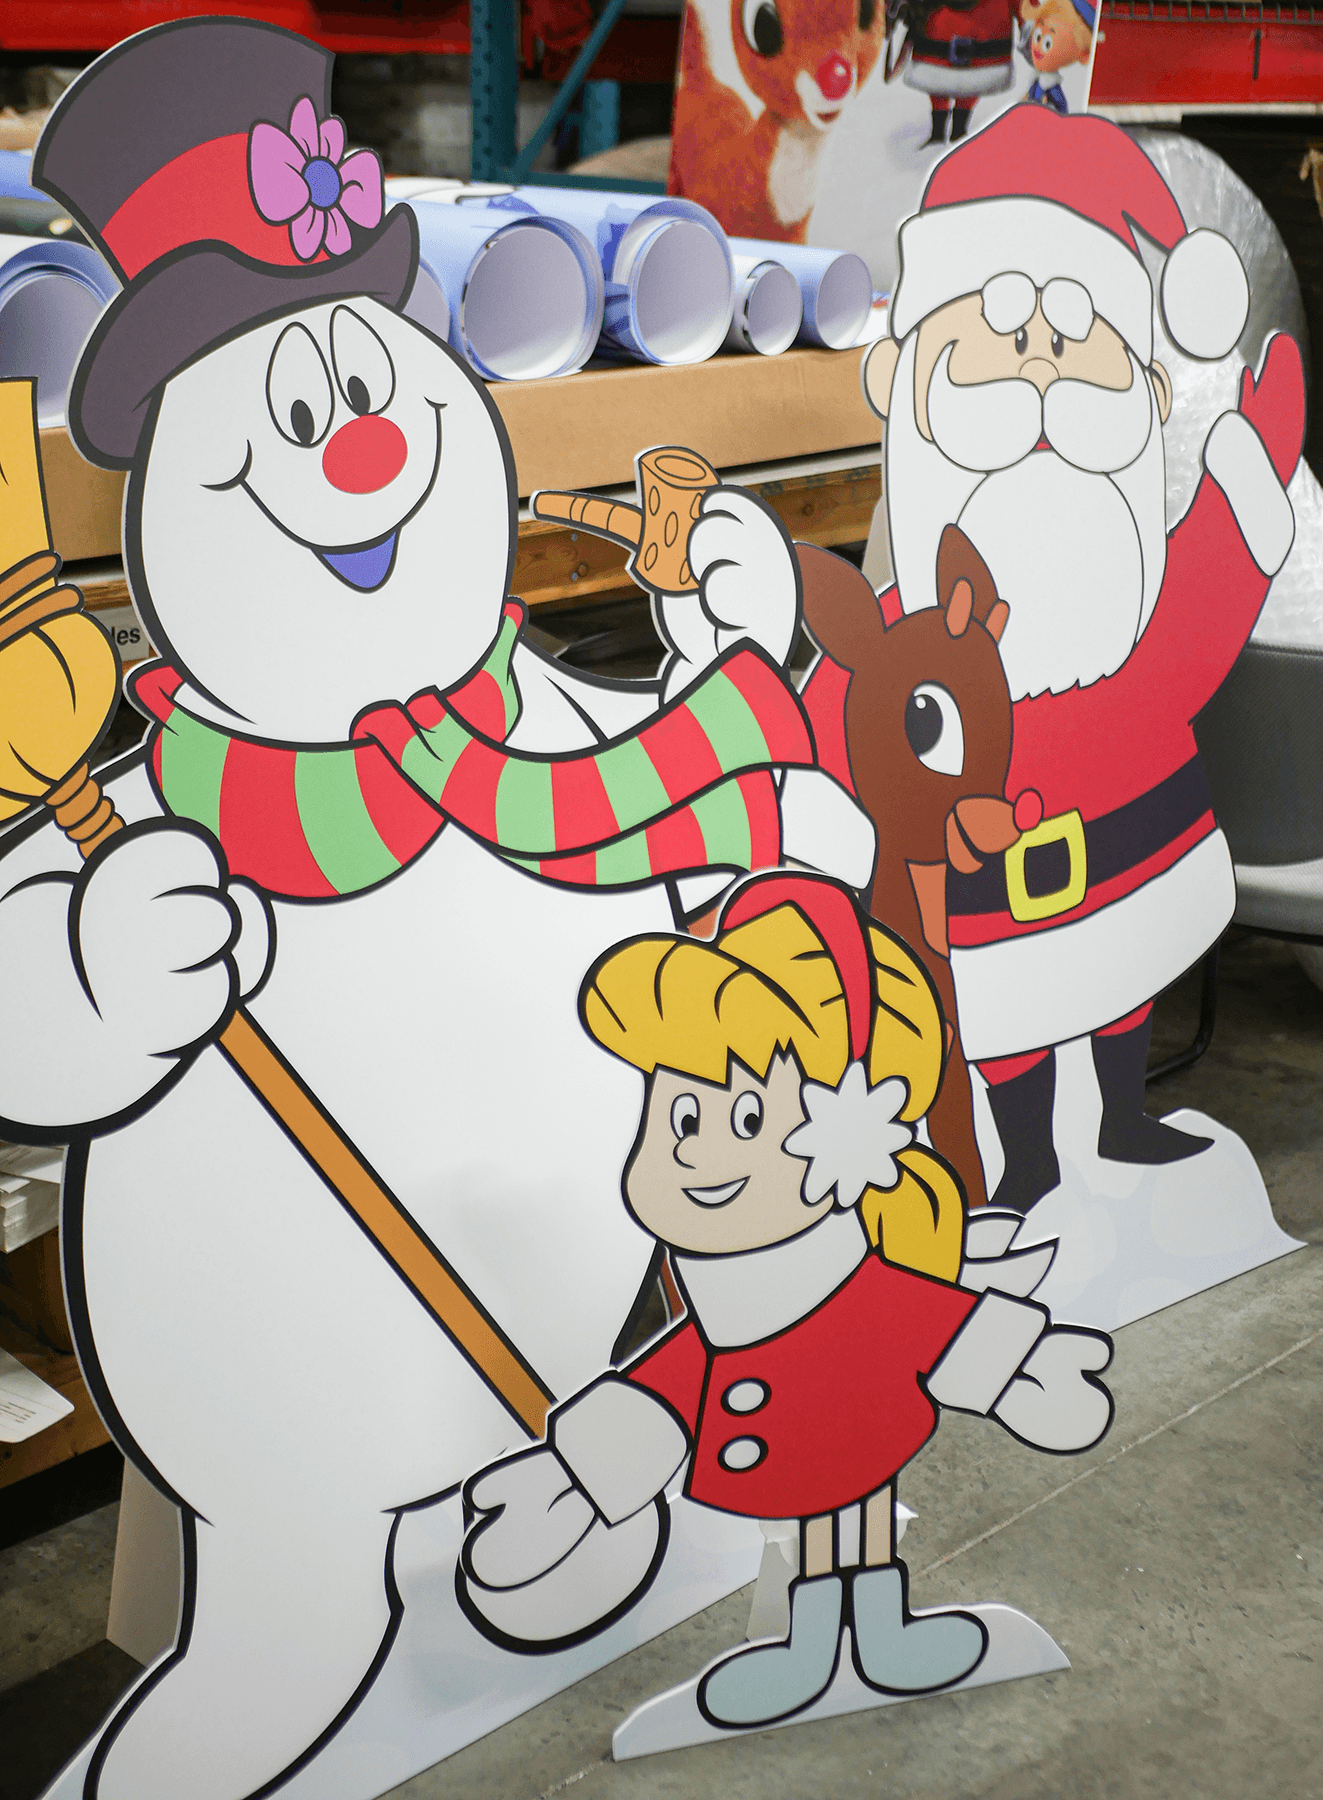 Unwrapping Holiday Magic with Life-Sized Cutouts